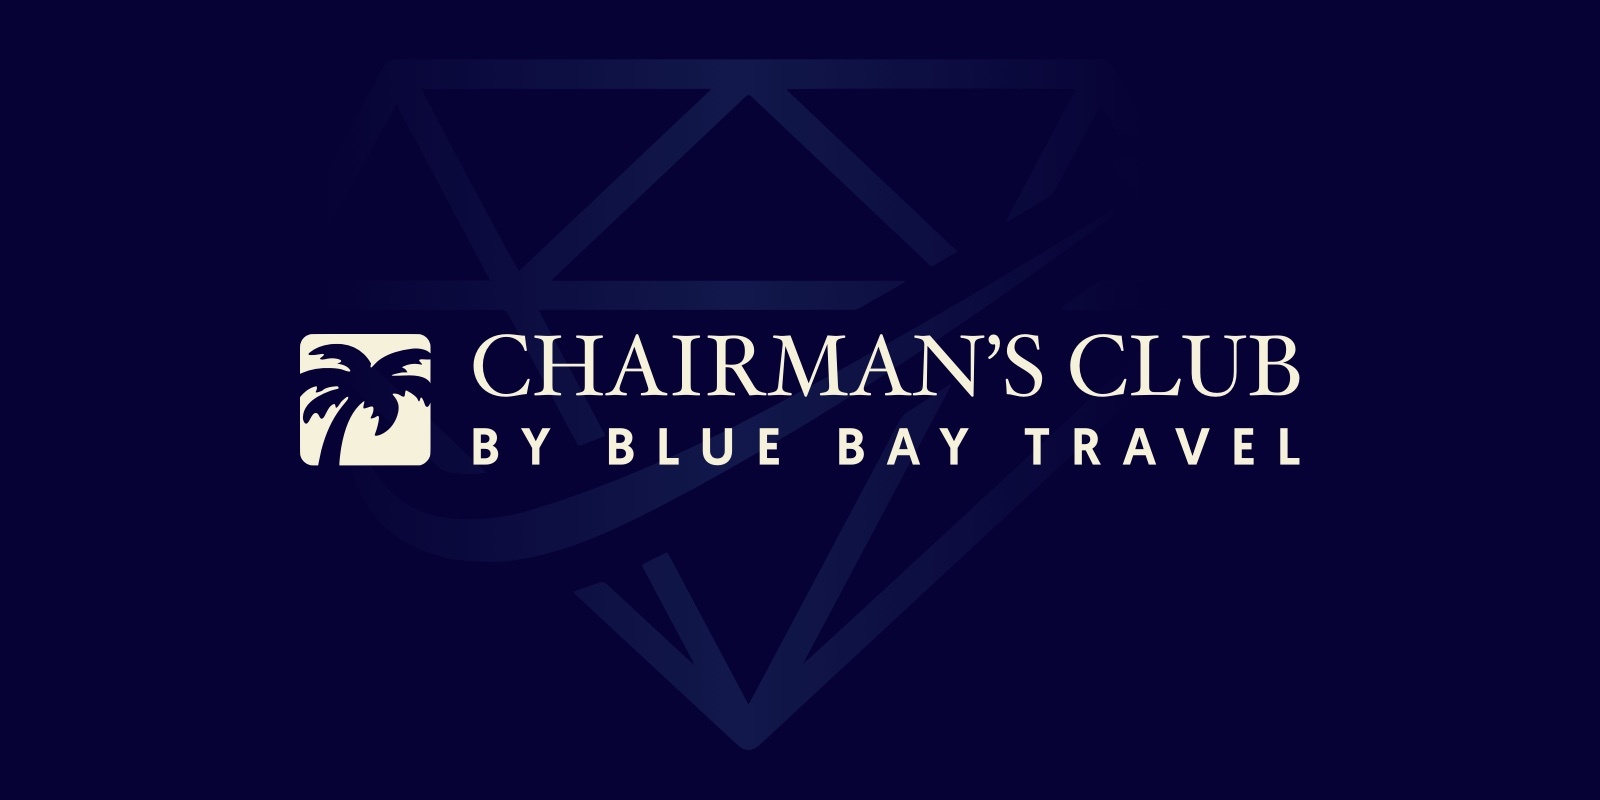 Blue Bay Travel are excited to announce the launch of the new Chairman's Club